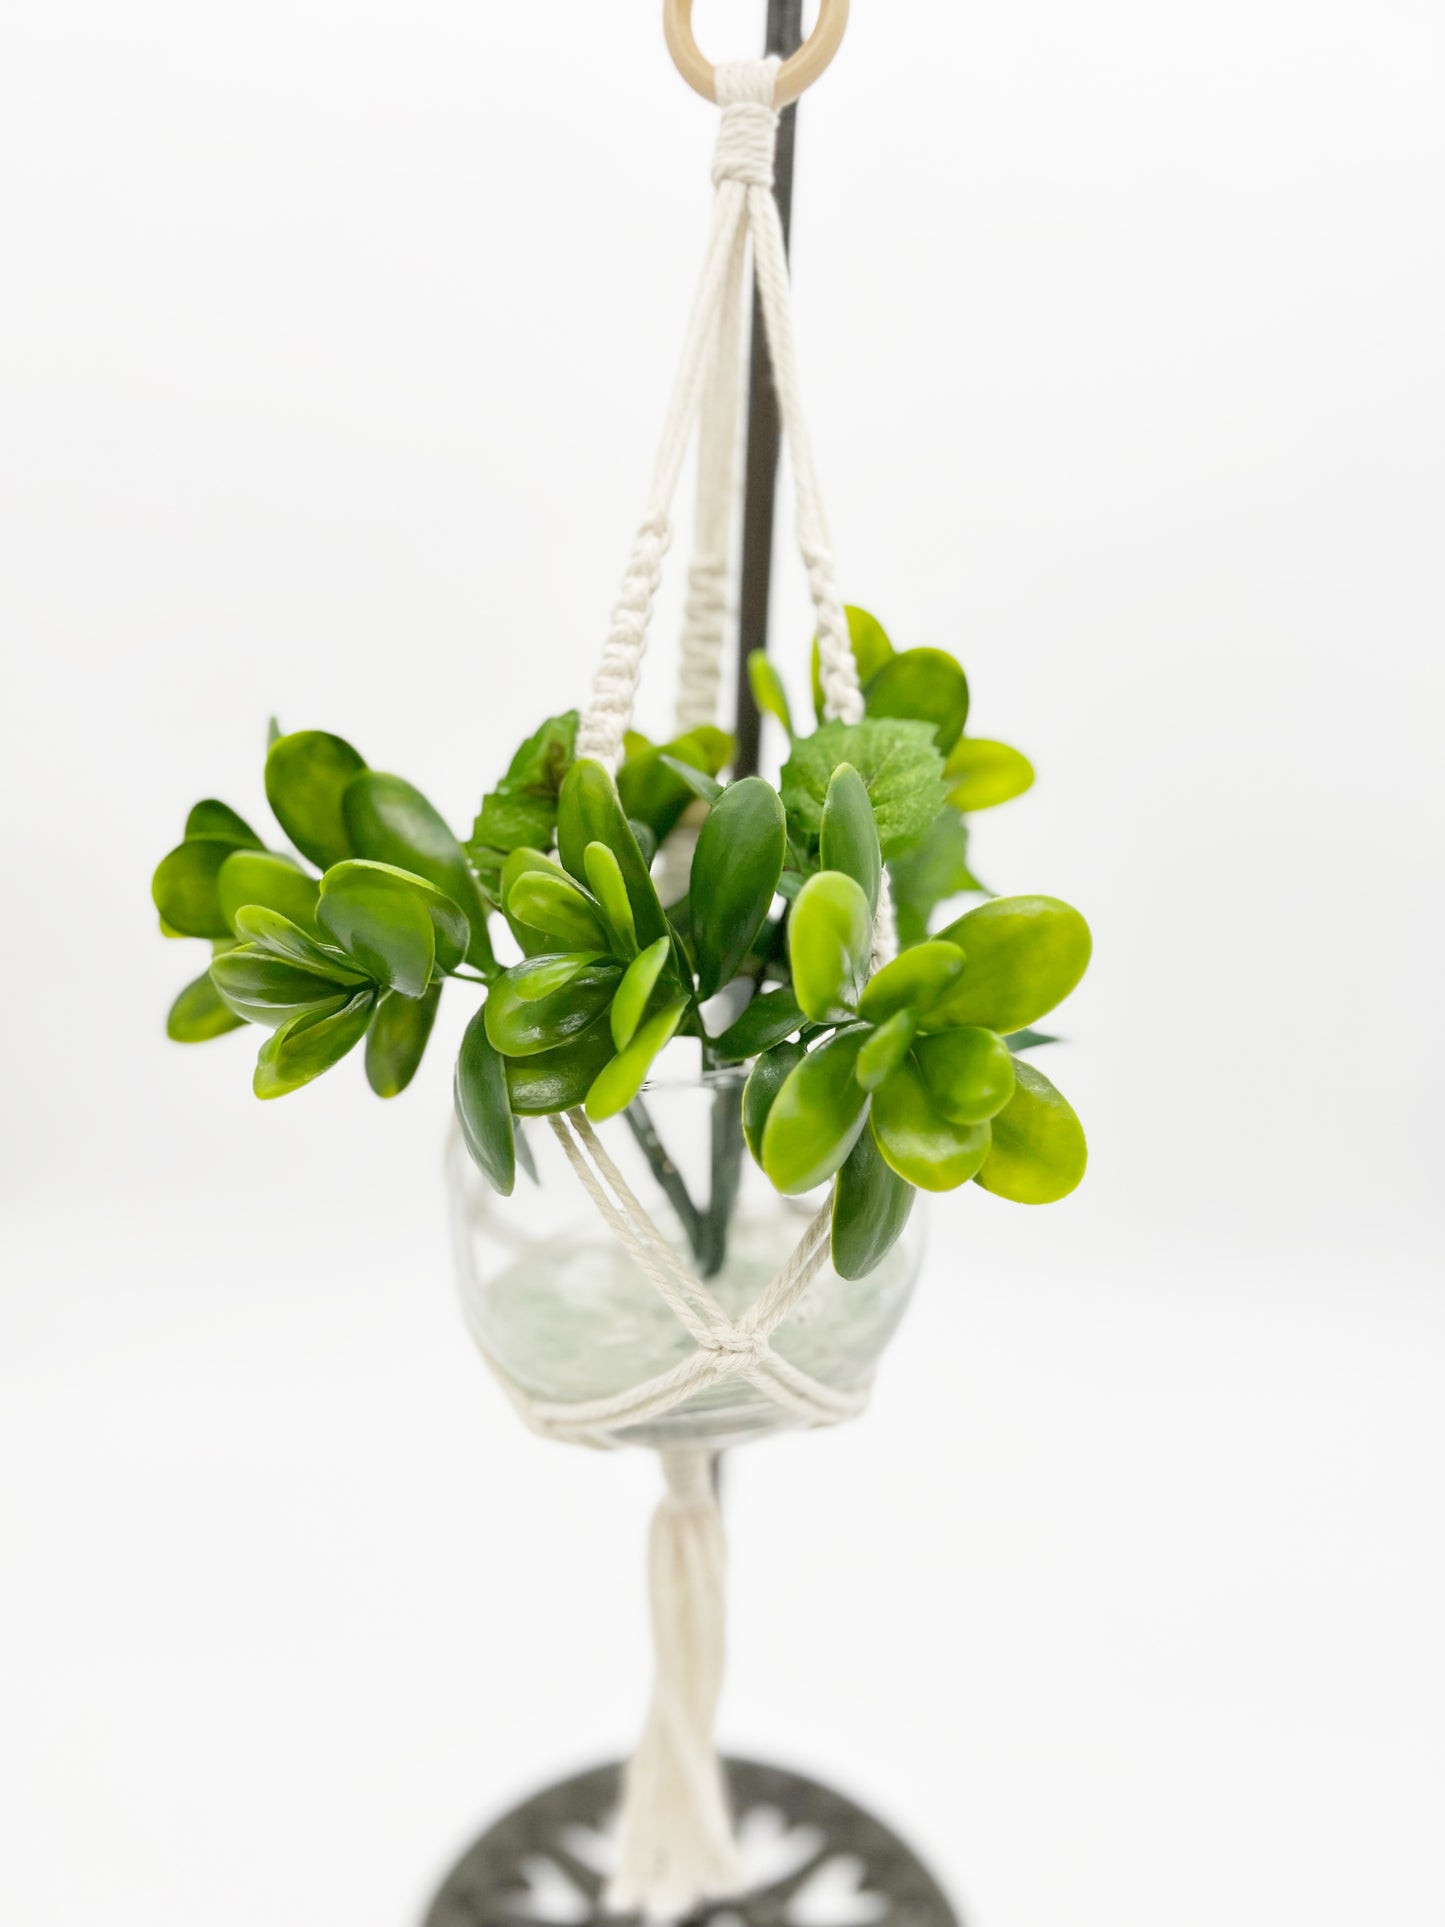 Boxwood and Ivy Hanging Macrame Planter in Glass Bowl